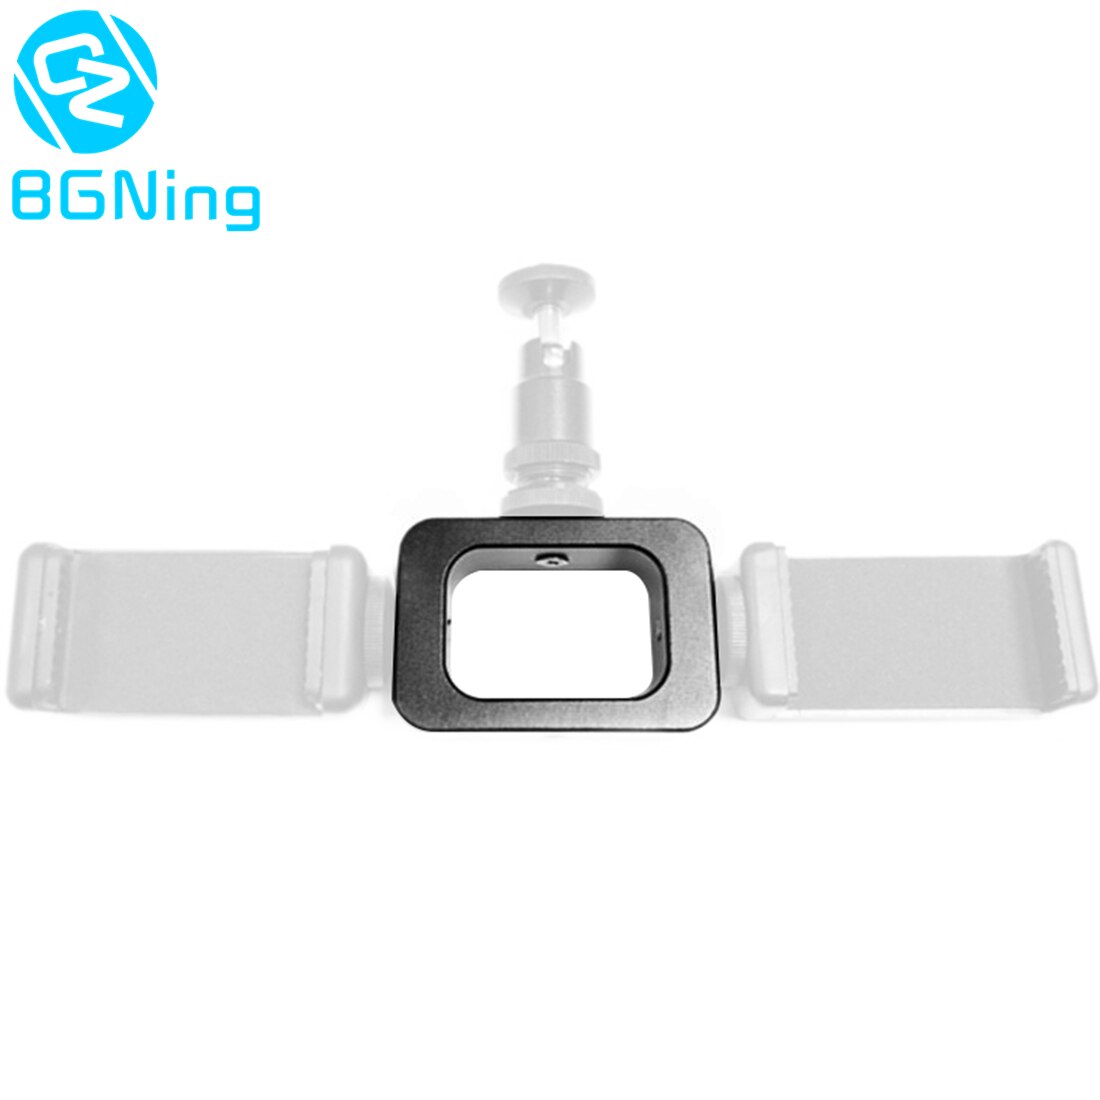 BGNing Aluminum Multifunction Clip Bracket Mount Adapter Mobile Phone Holder Support Camera Stands for Live Photography Accessories